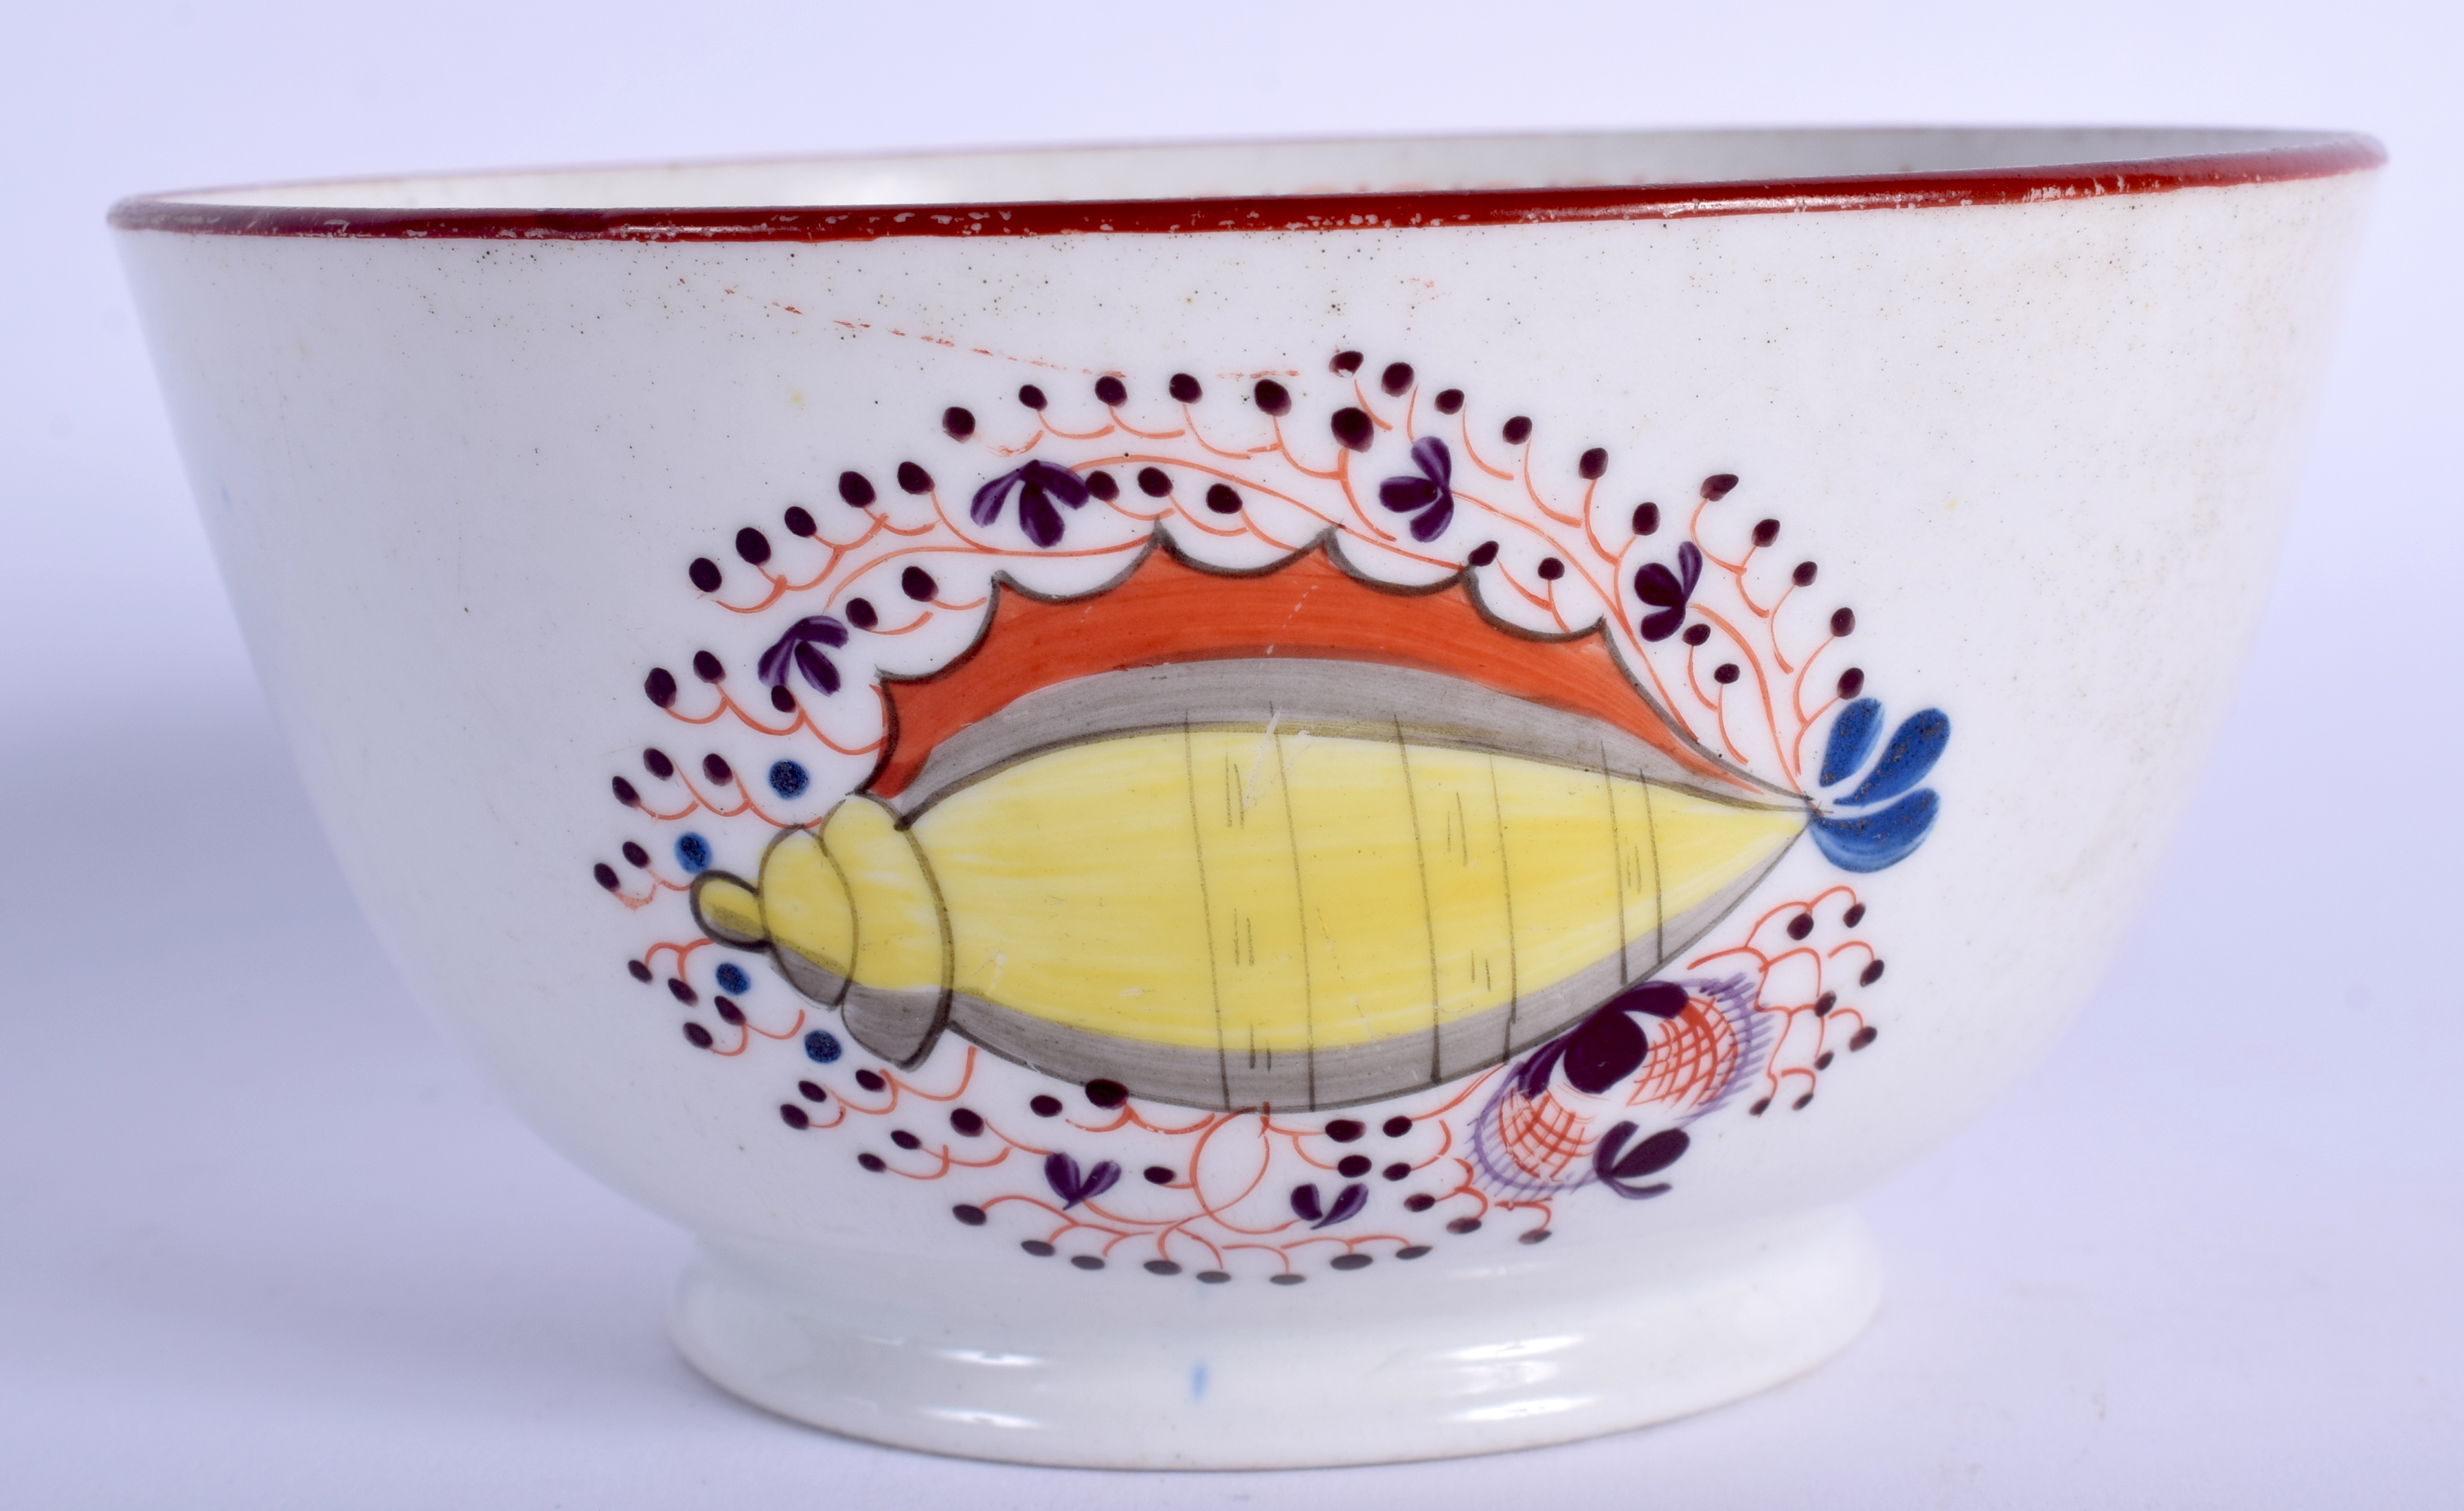 A LATE 18TH CENTURY ENGLISH PORCELAIN SLOP BOWL painted with shells. 12 cm diameter.